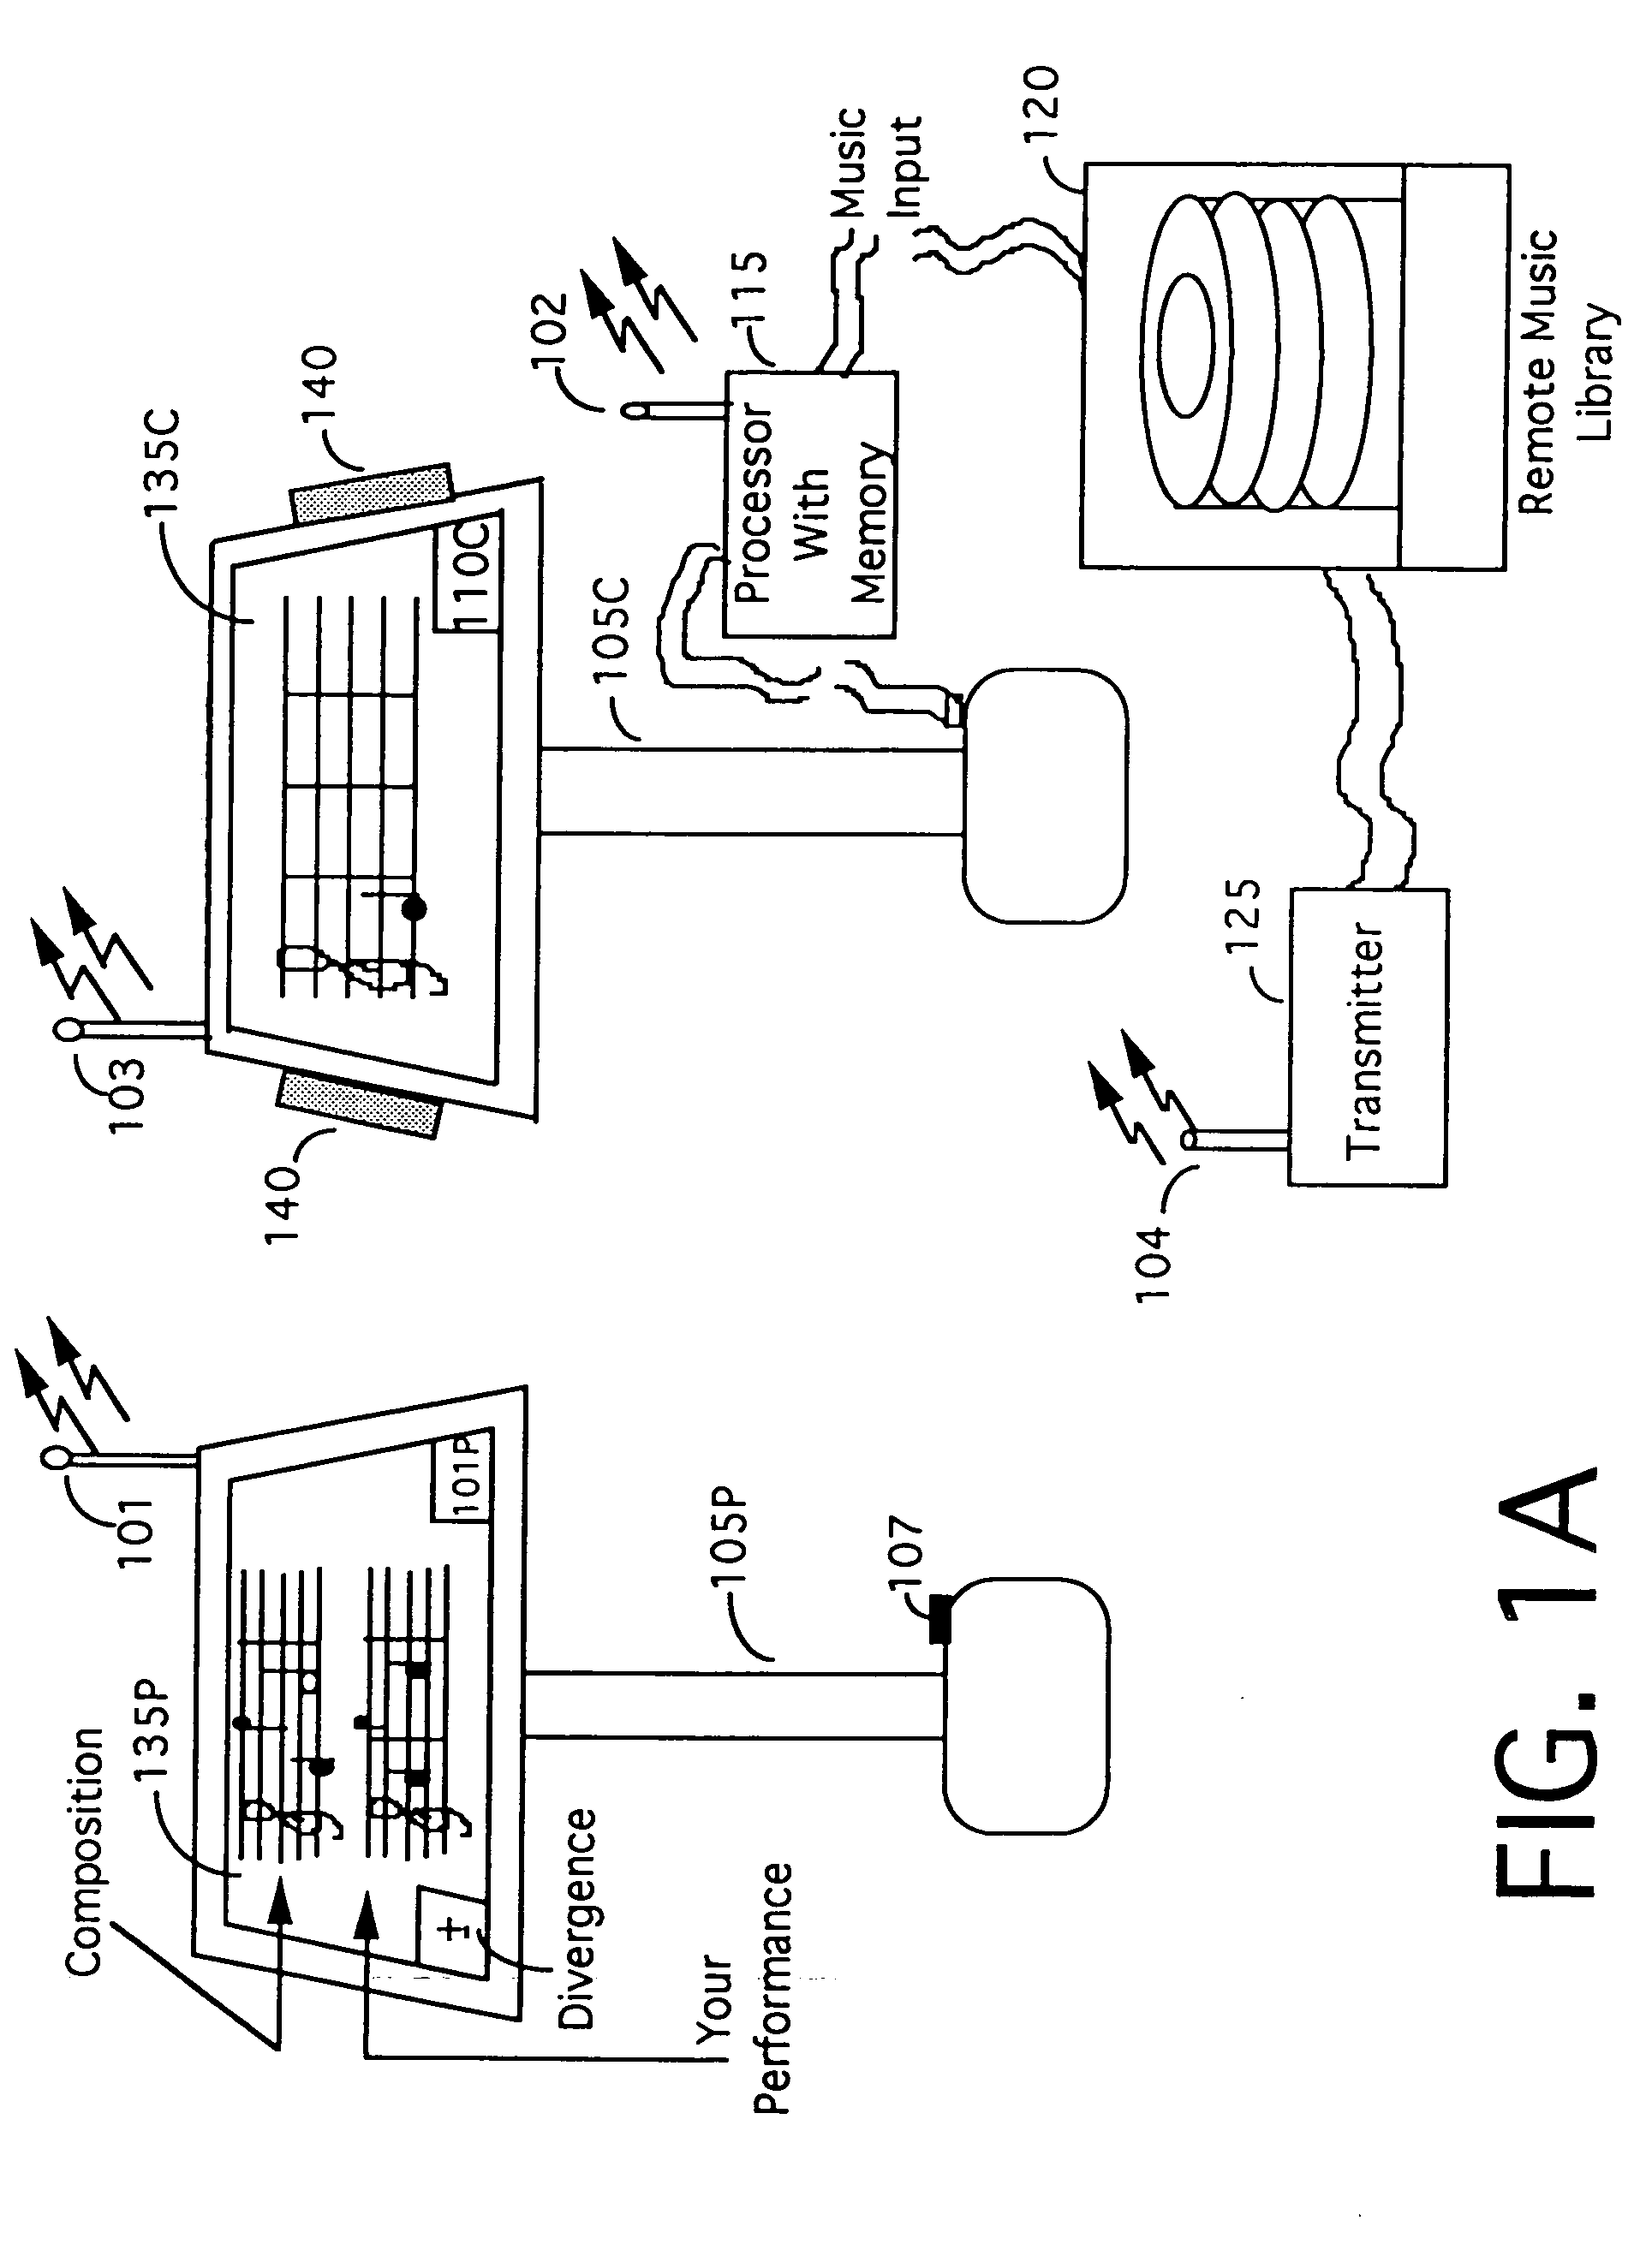 Multi-dimensional transformation systems and display communication architecture for compositions and derivations thereof